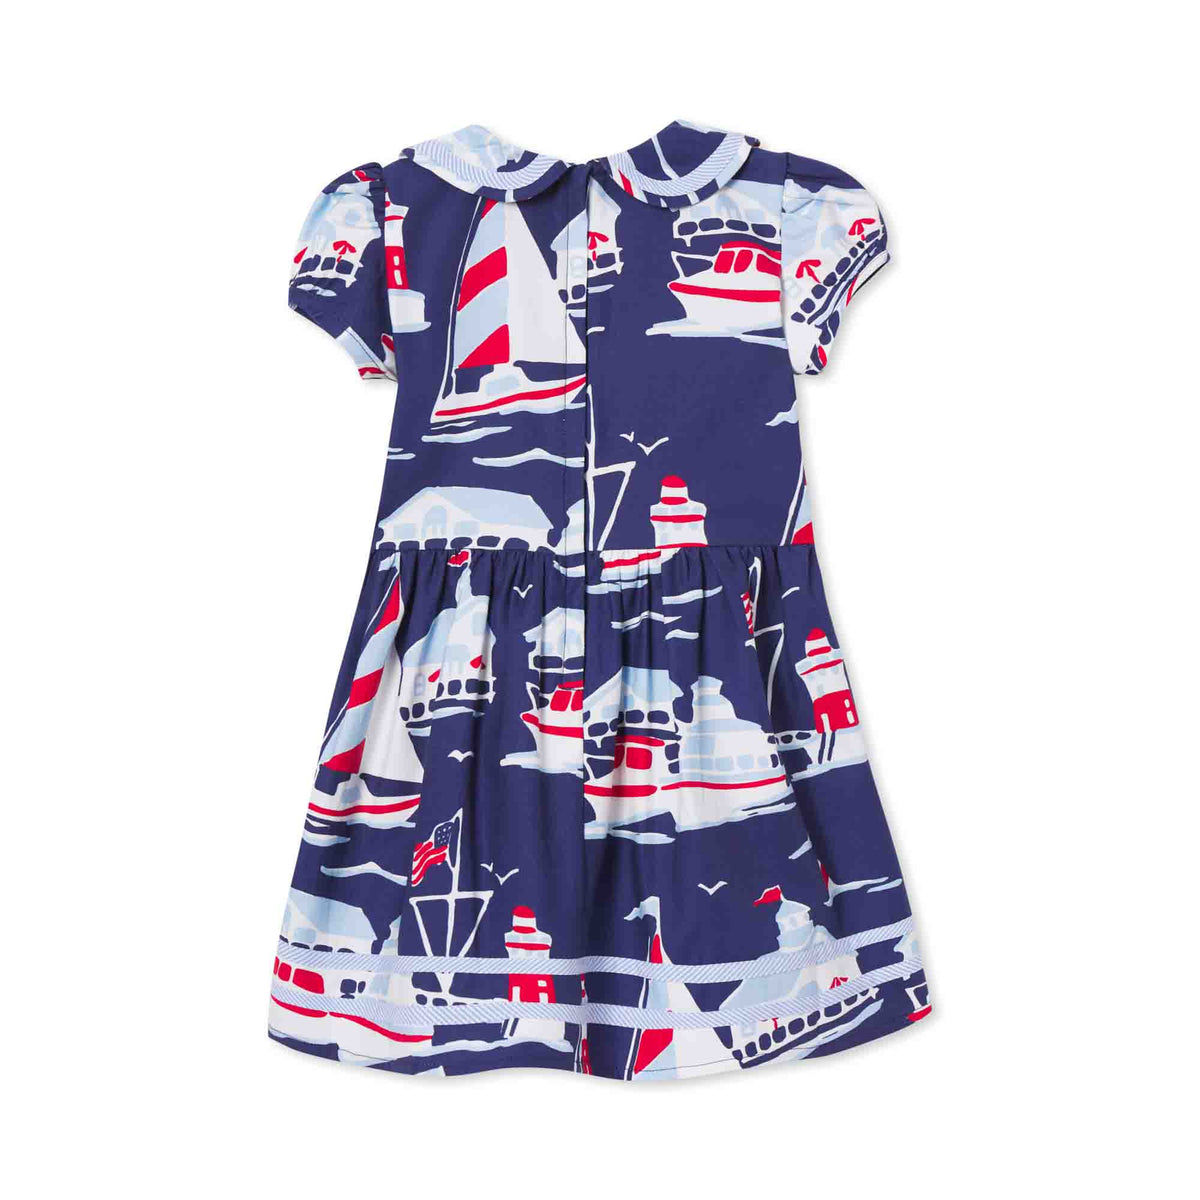 Classic and Preppy Hazel Dress, Five Mile River Print-Dresses, Jumpsuits and Rompers-CPC - Classic Prep Childrenswear